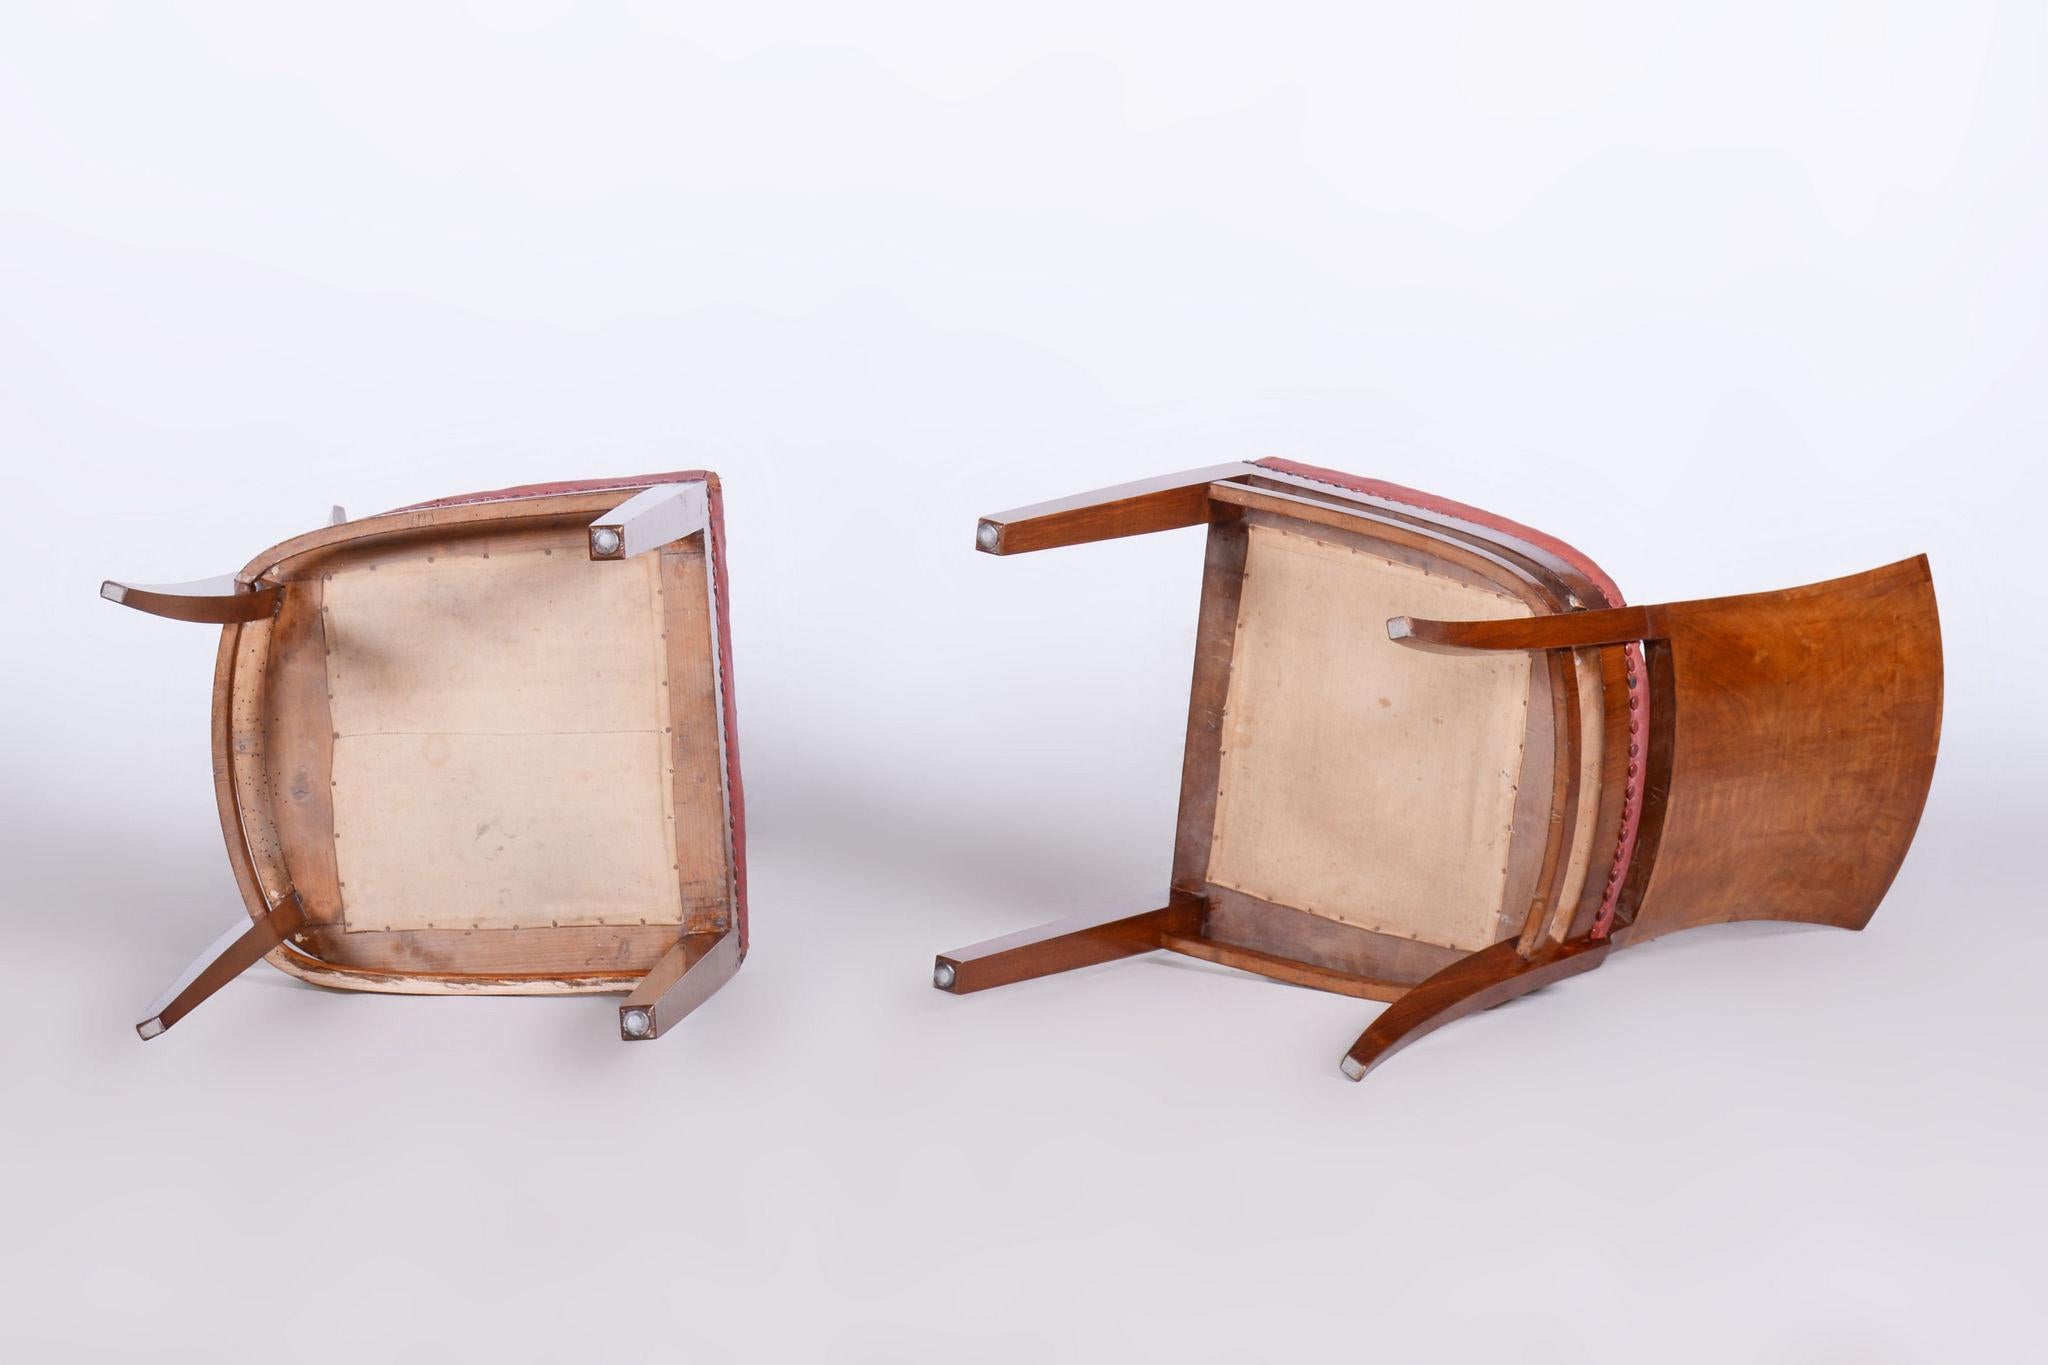 Six Art Deco Chairs, Walnut, Restored, Original Upholstery, France, 1920s For Sale 6